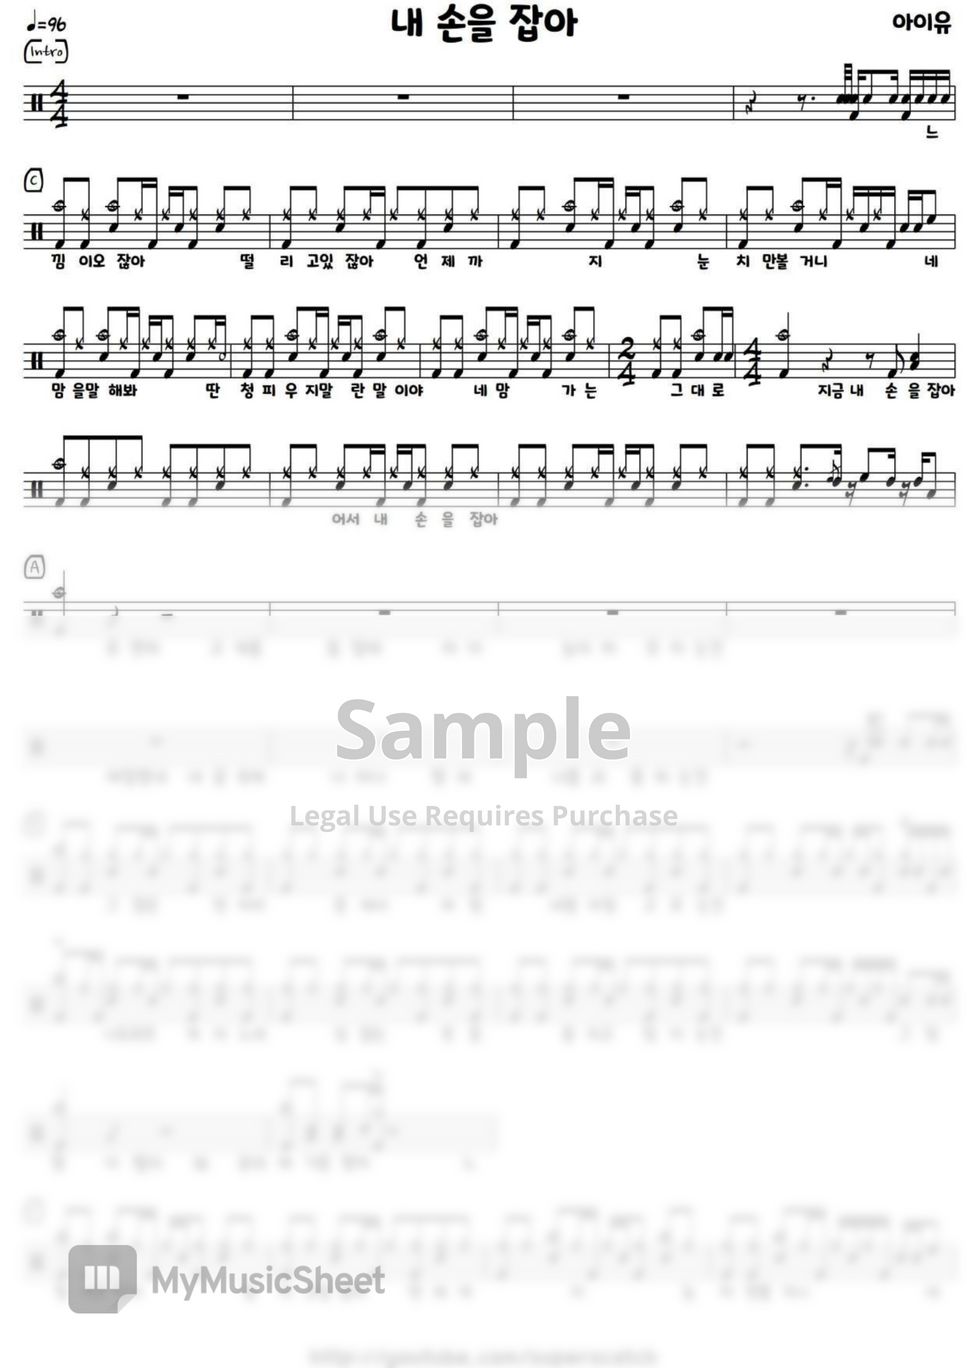 IU - Hold My Hand (Drums Tab) by superscatch